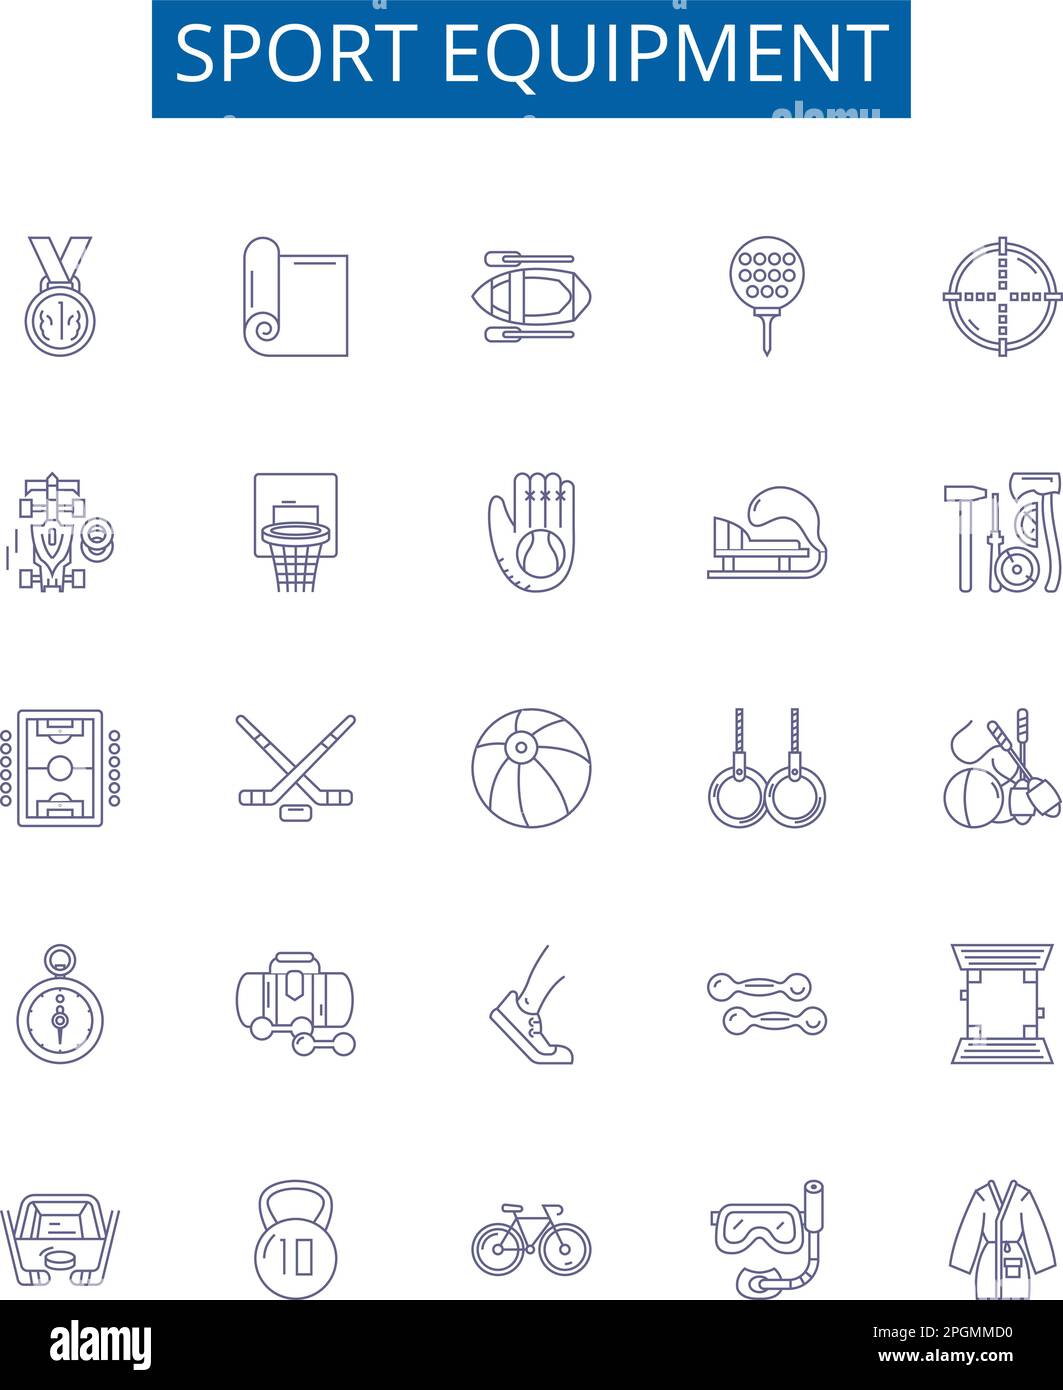 Sport equipment line icons signs set. Design collection of Gear, Balls, Racquets, Nets, Footwear, Headgear, Helmets, Padding outline concept vector Stock Vector